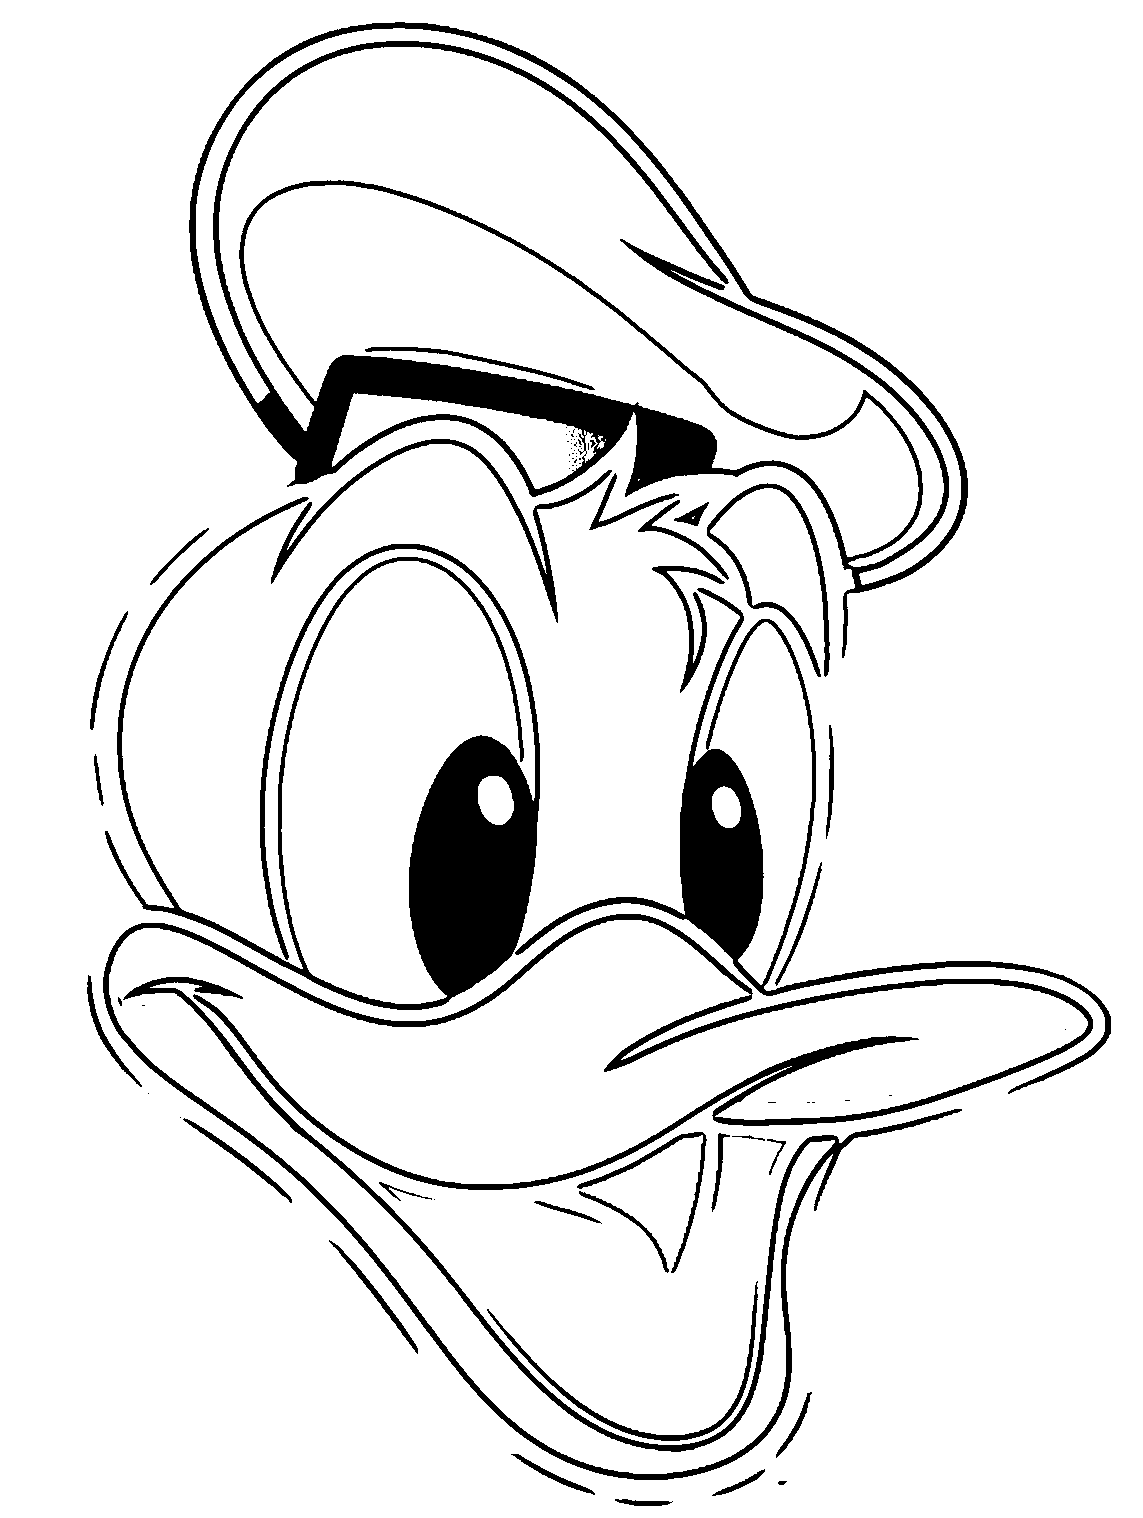 Donald Duck Coloring Page WeColoringPage 145 | Wecoloringpage